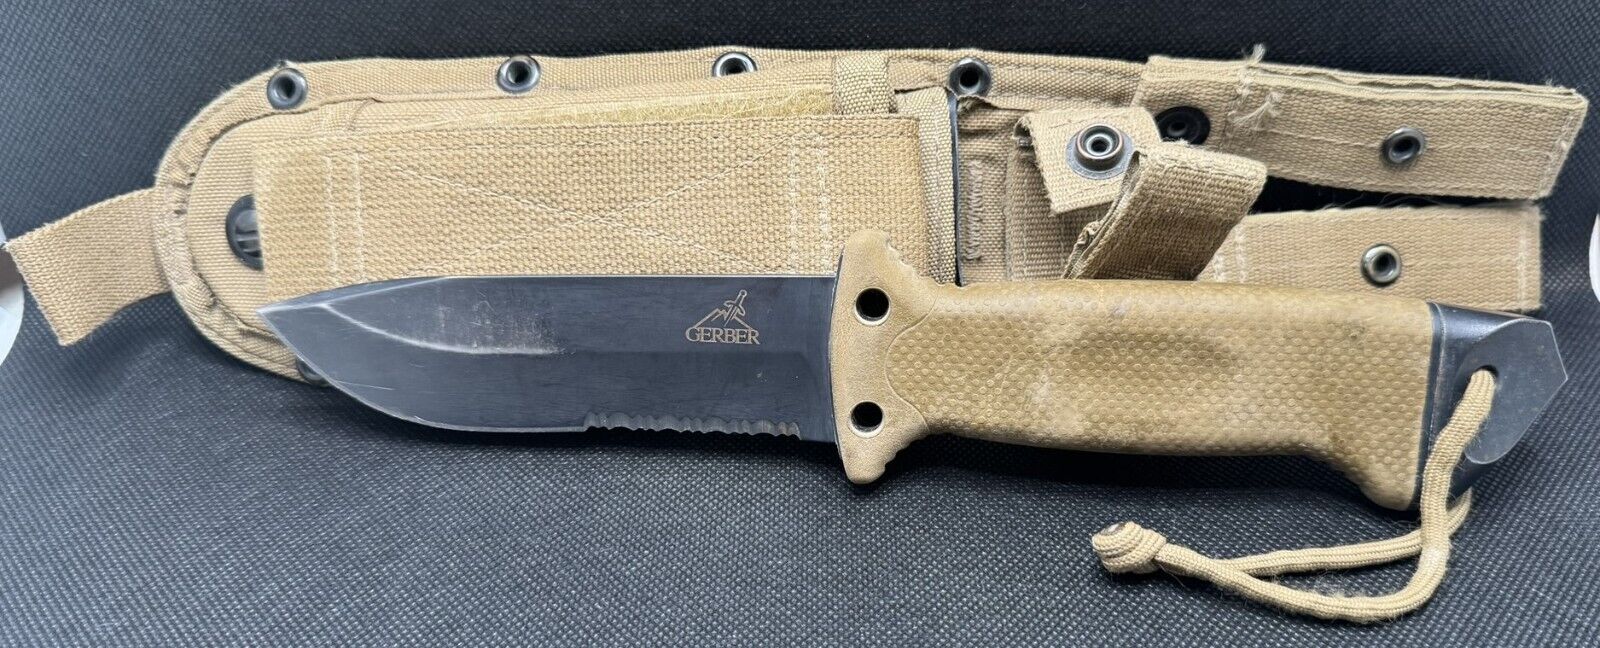 GERBER LMF II Infantry tactical fighting knife USA with Rare Spec Ops Sheath